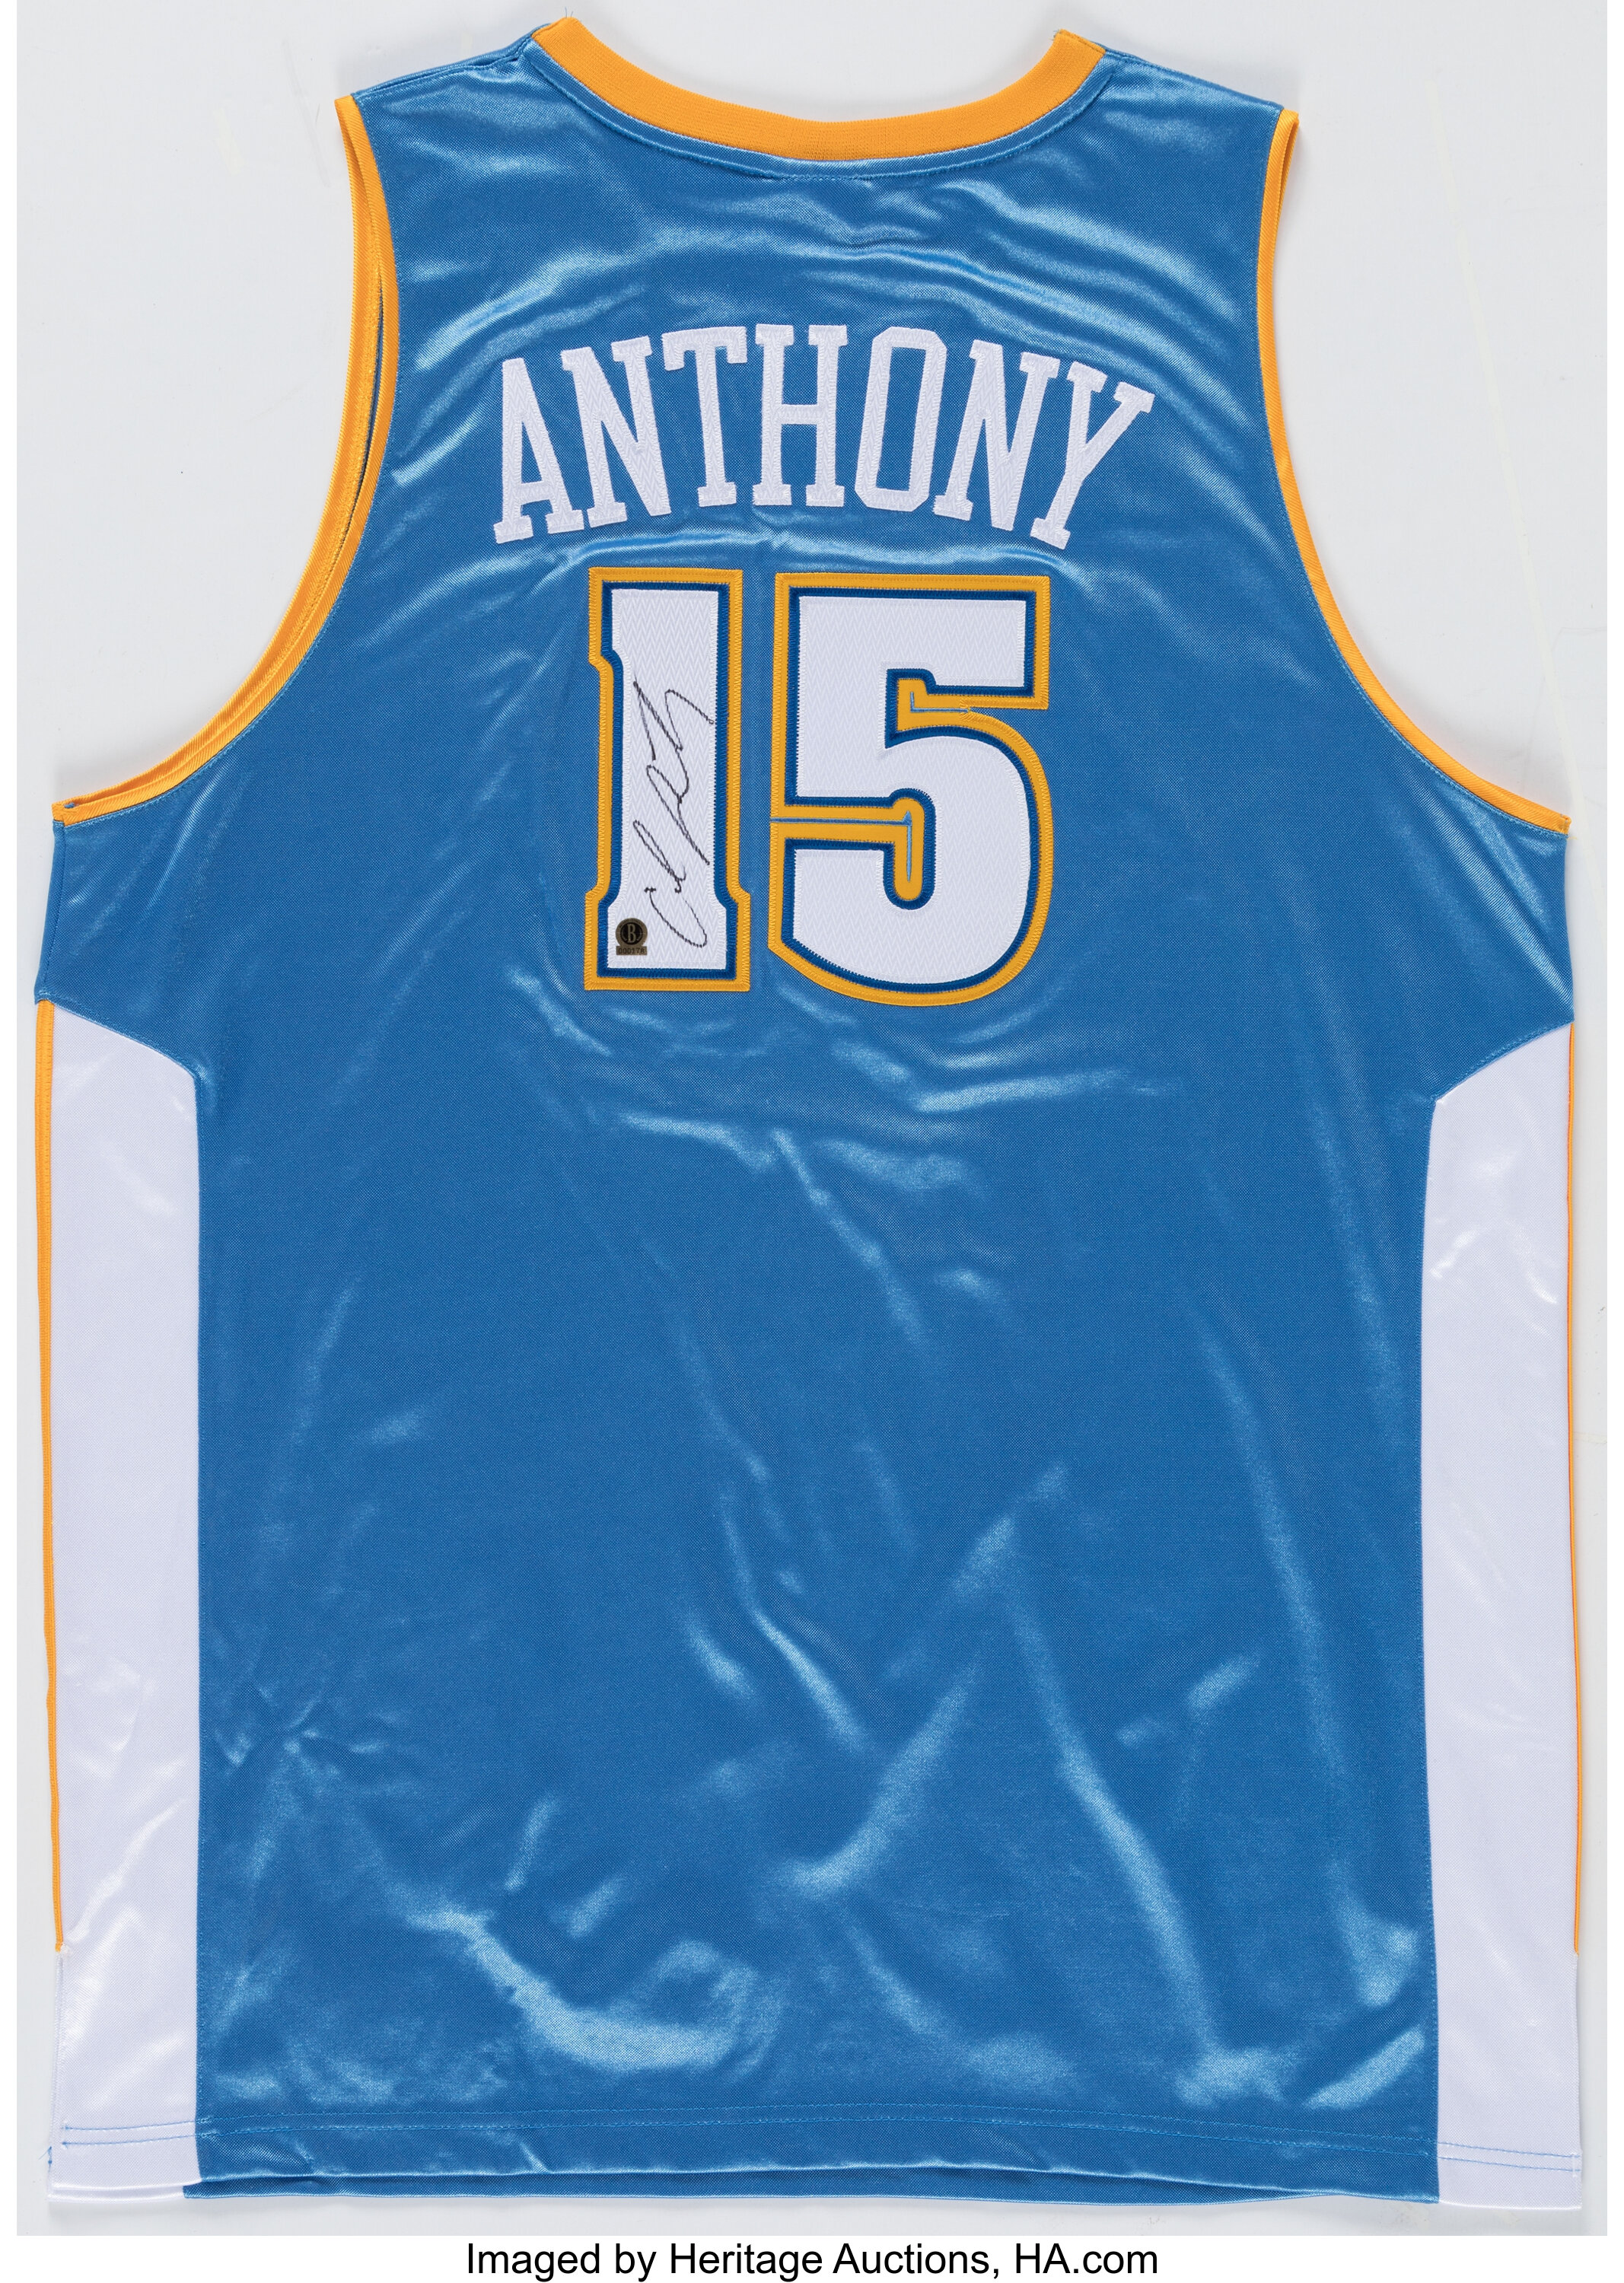 NBA Carmelo Anthony Signed Jerseys, Collectible Carmelo